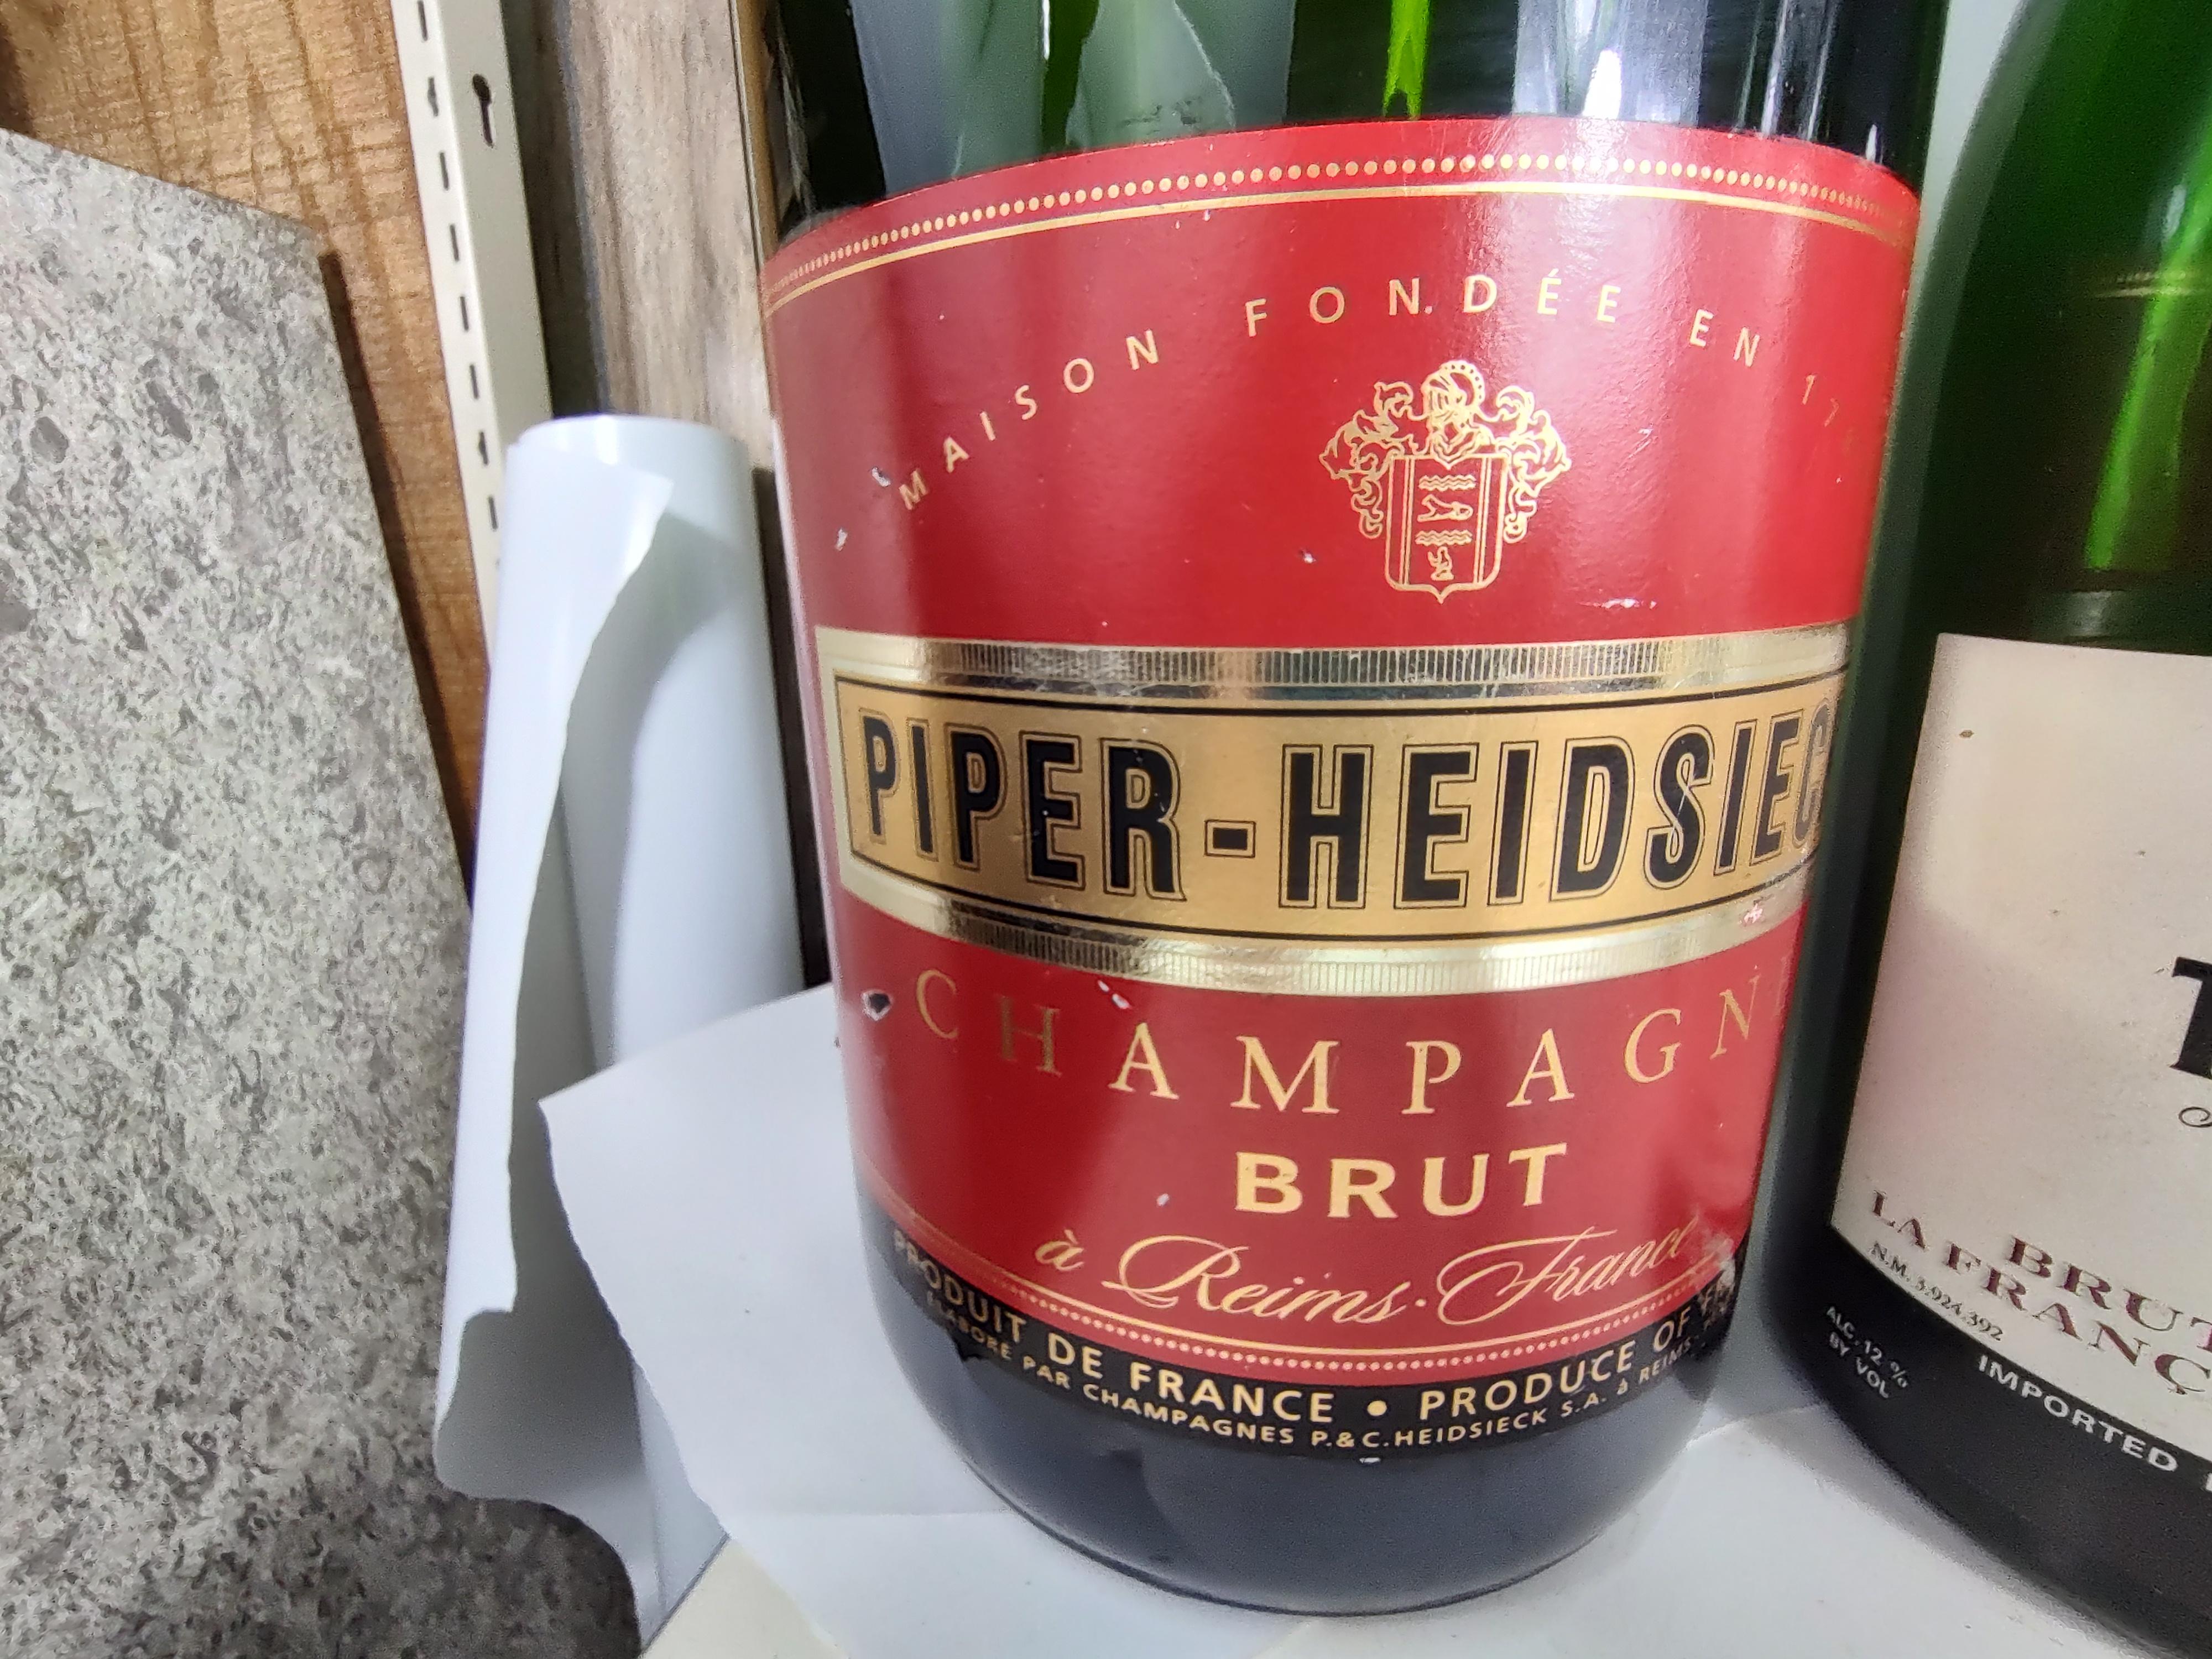 Spectacular in size, 3 bottles are 27 x 7.5, smaller bottle is 20 x 4.5. Taittinger, Perrier Jouet, Moet & Chandon and Piper Heidsieck. All in good condition with age related wear. Can be parcel posted.